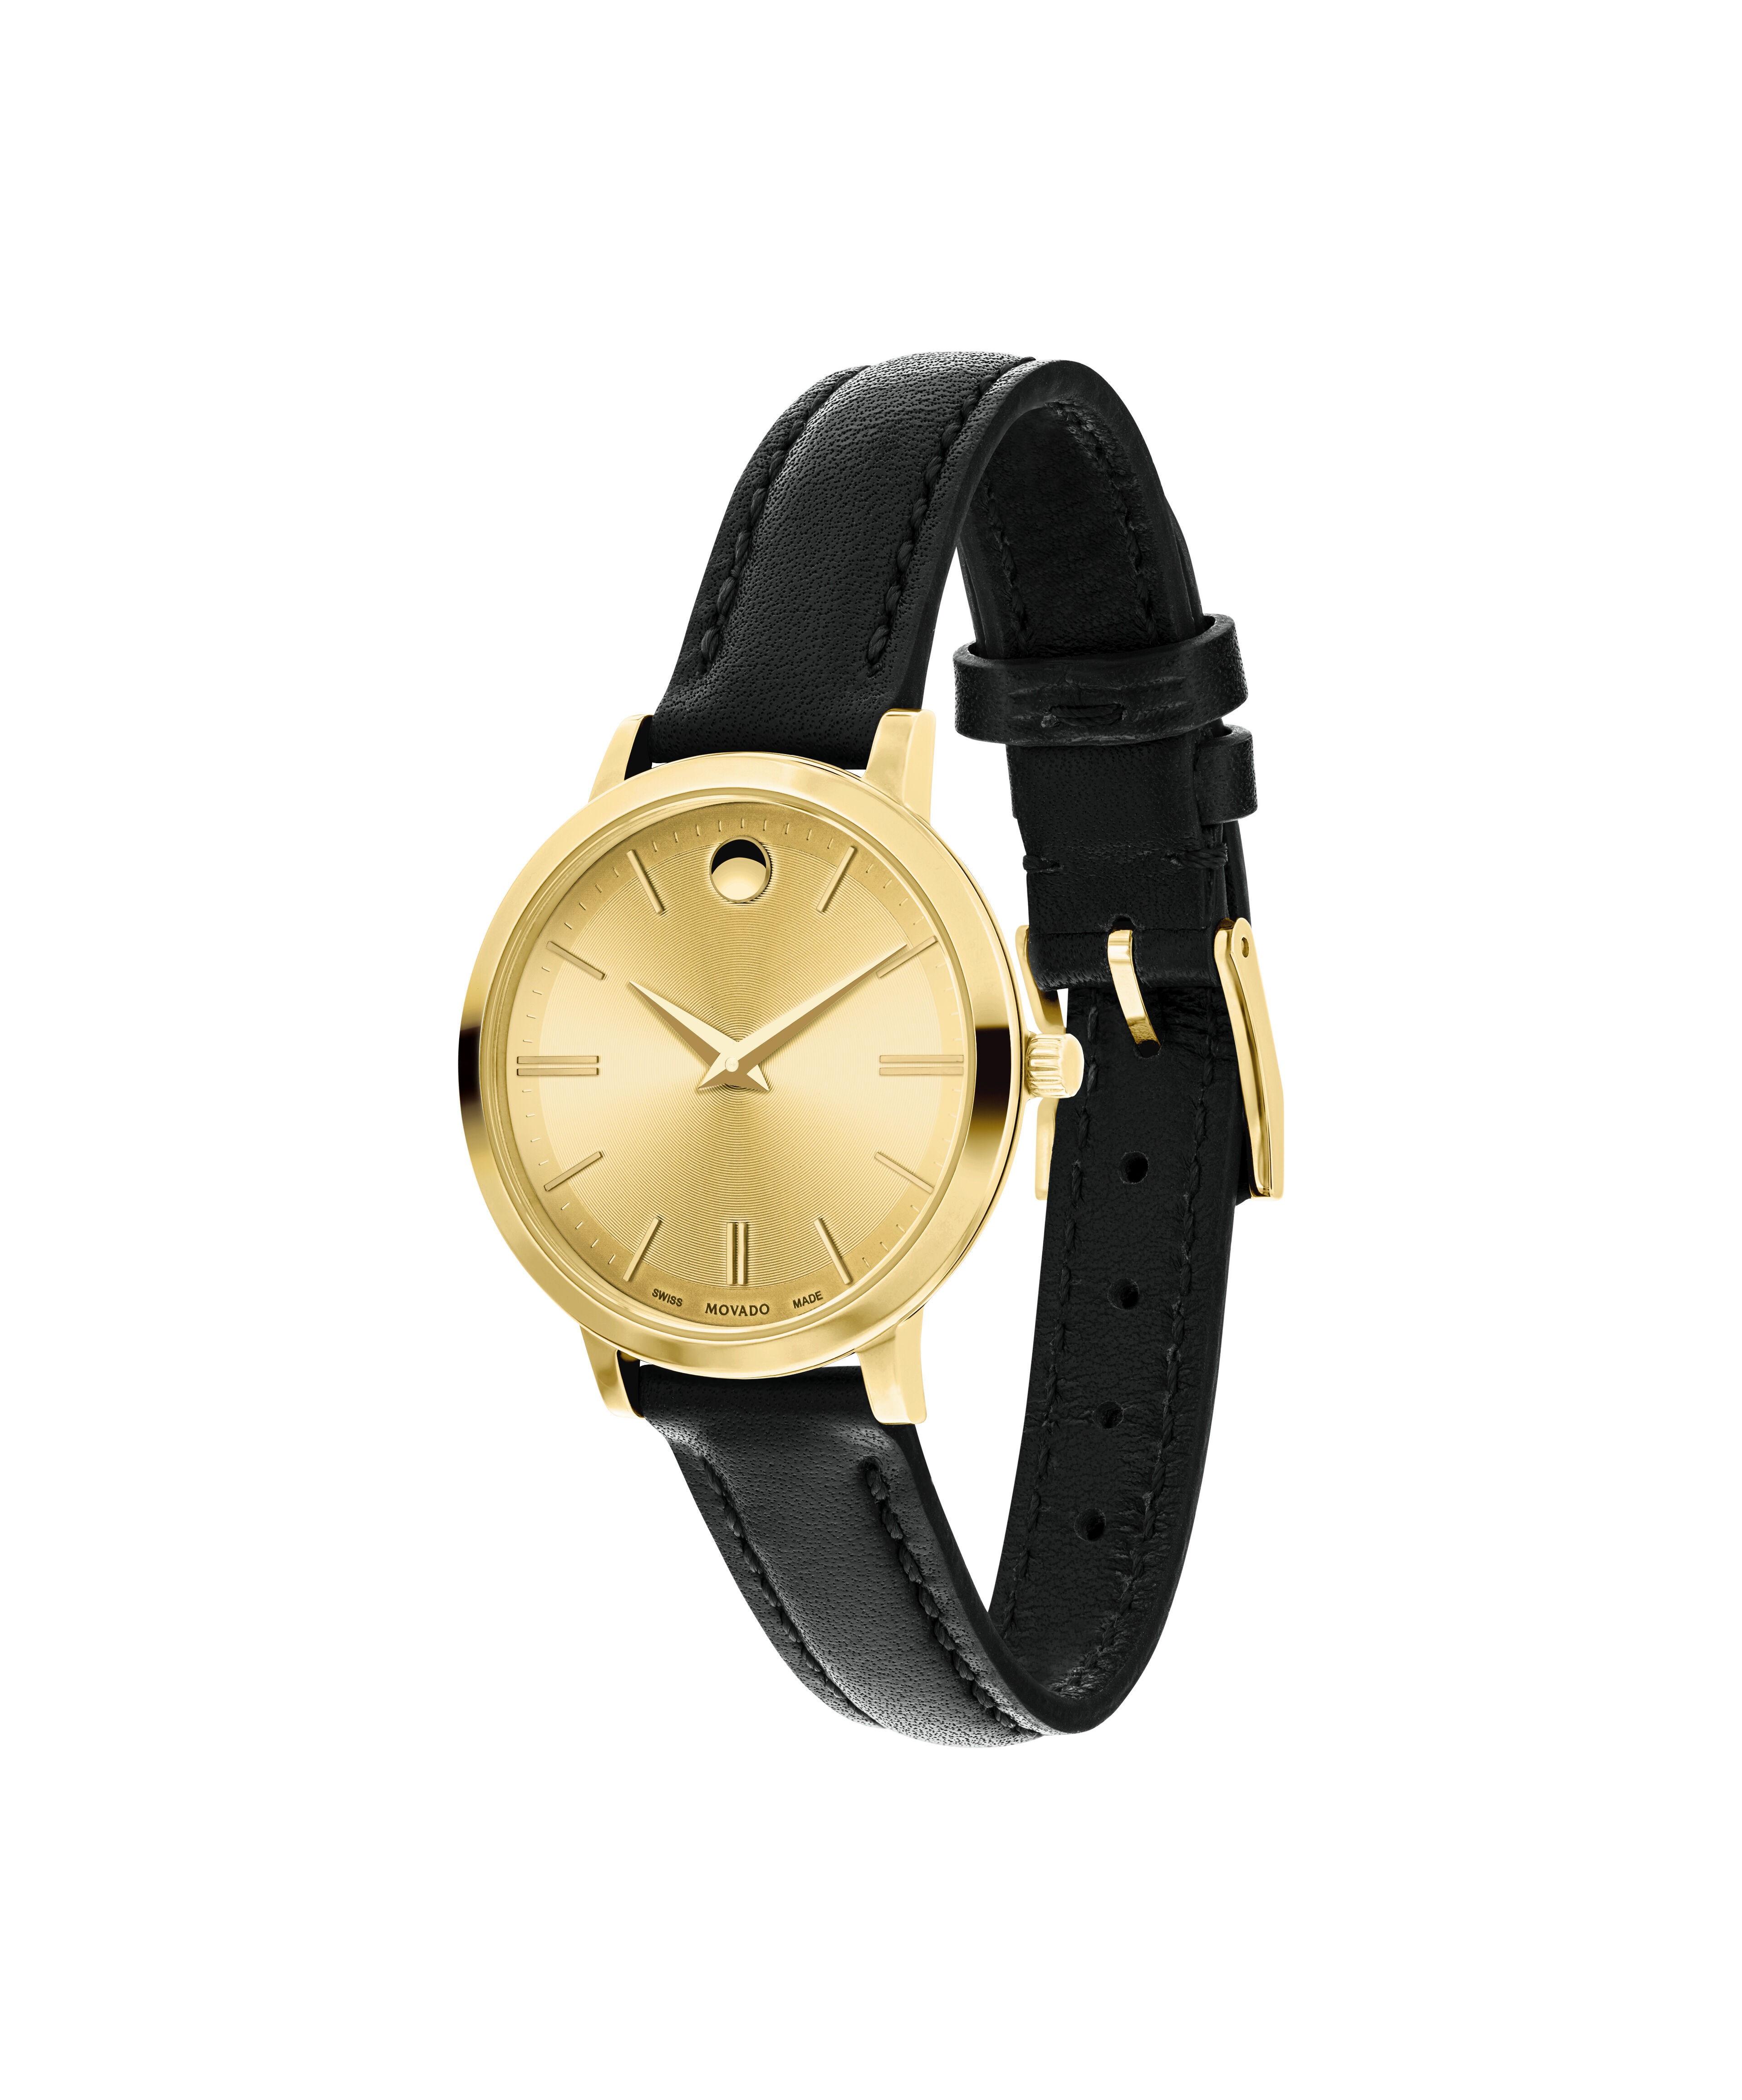 Movado Rava 0606084 25mm Gold Plated Stainless Steel Black Dial Women's WatchMovado 1960's Vintage Movado Kingmatic Sub Sea Stainless Steel Watch (# 12201)